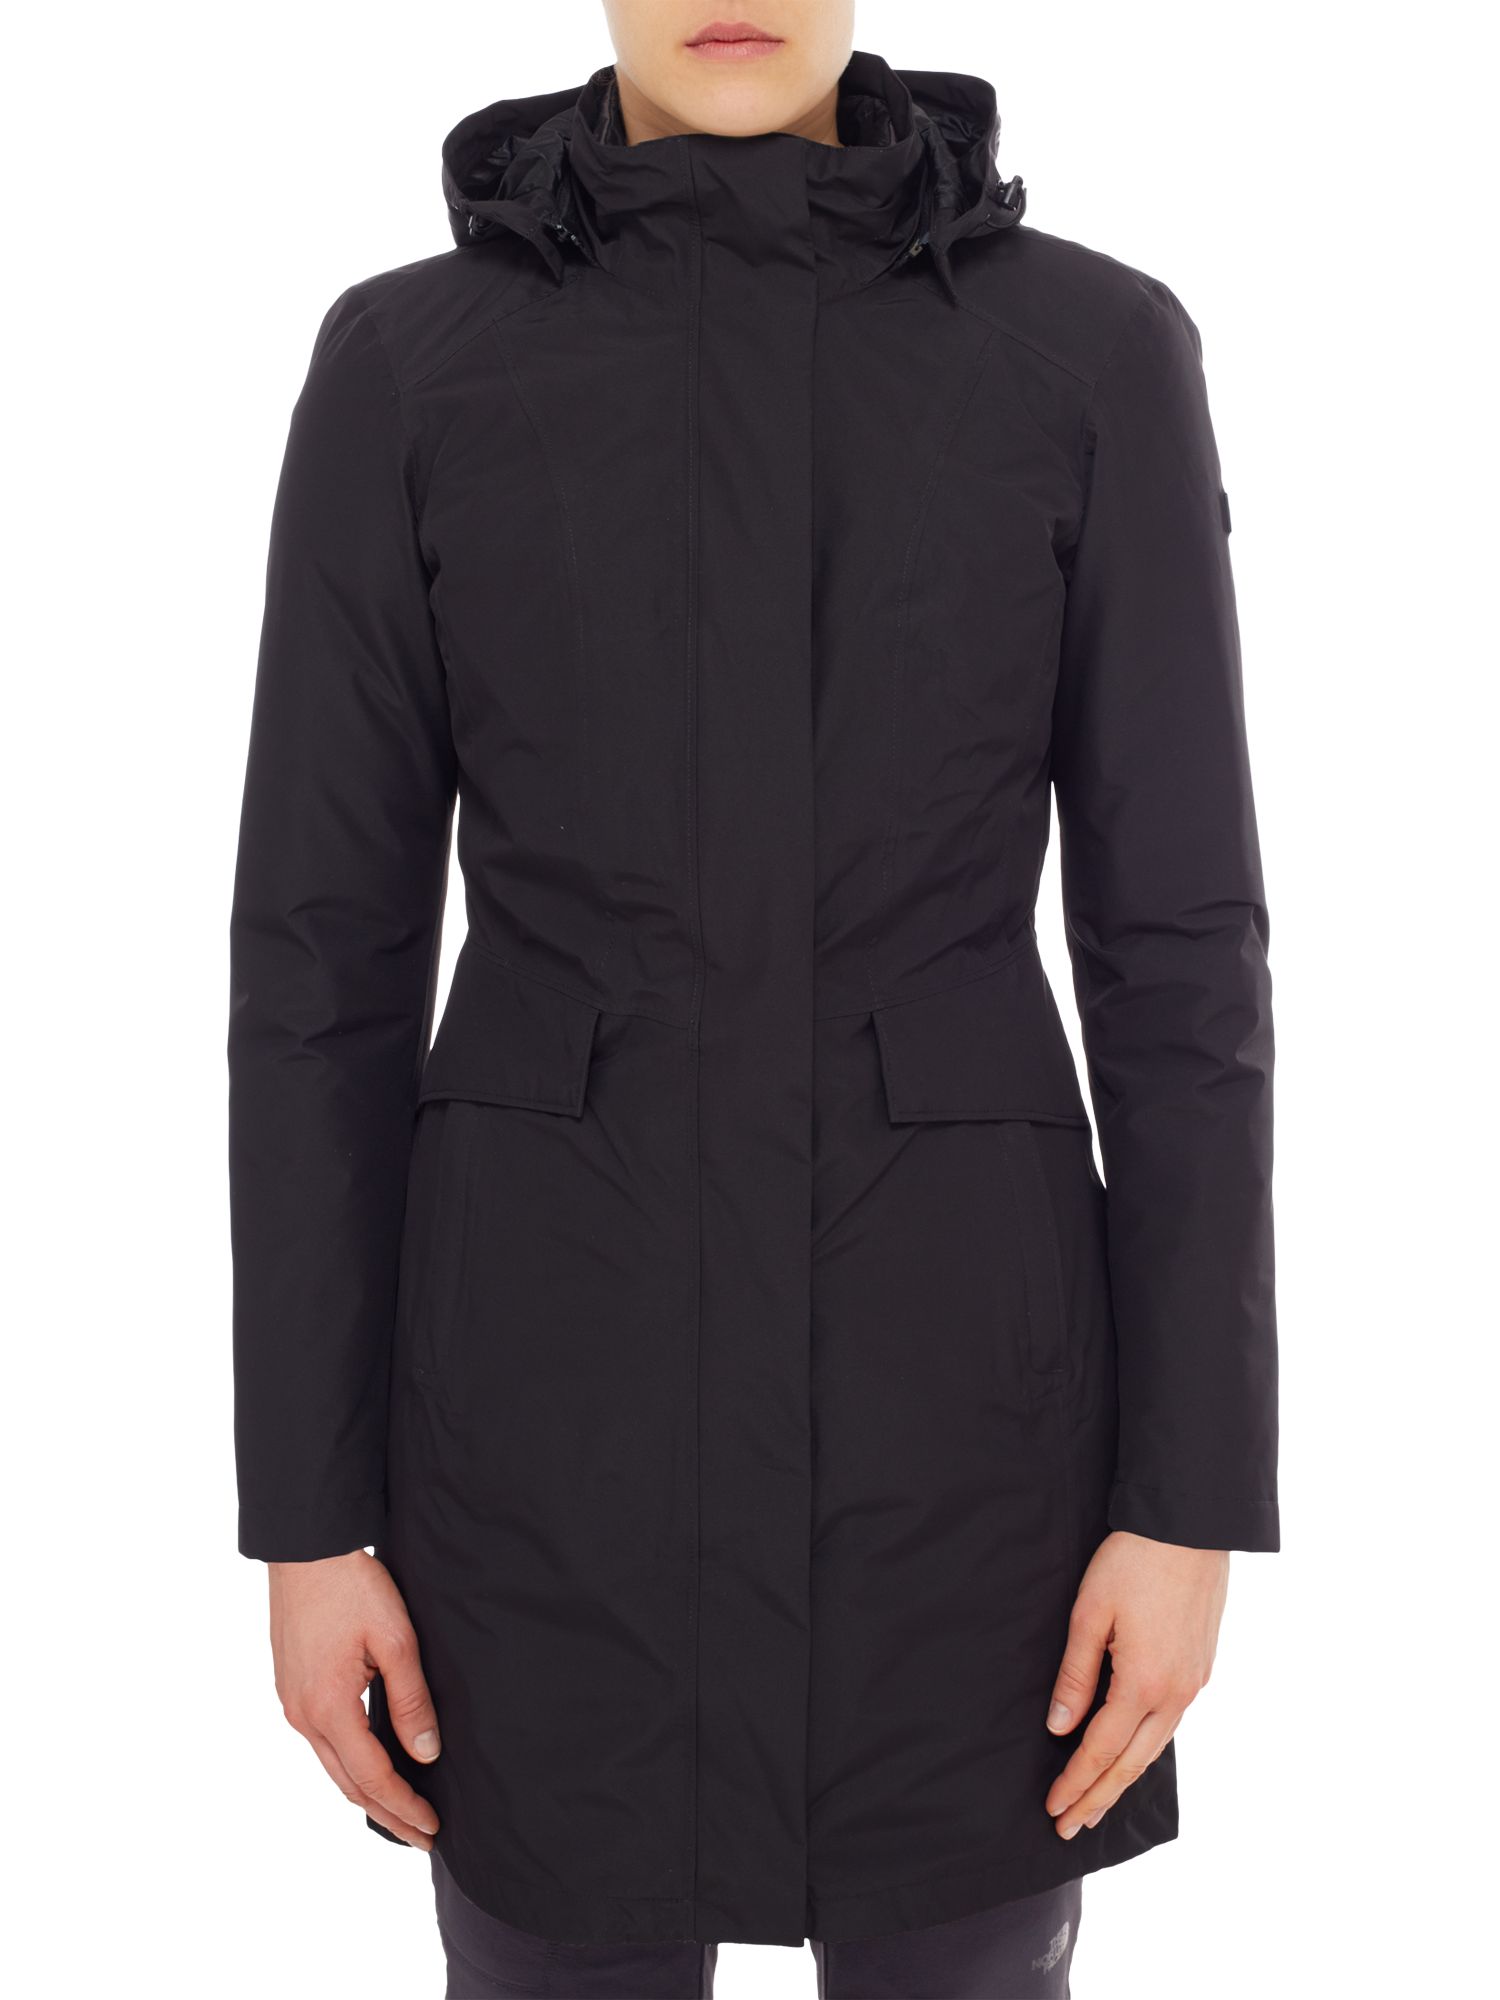 north face women's suzanne triclimate jacket